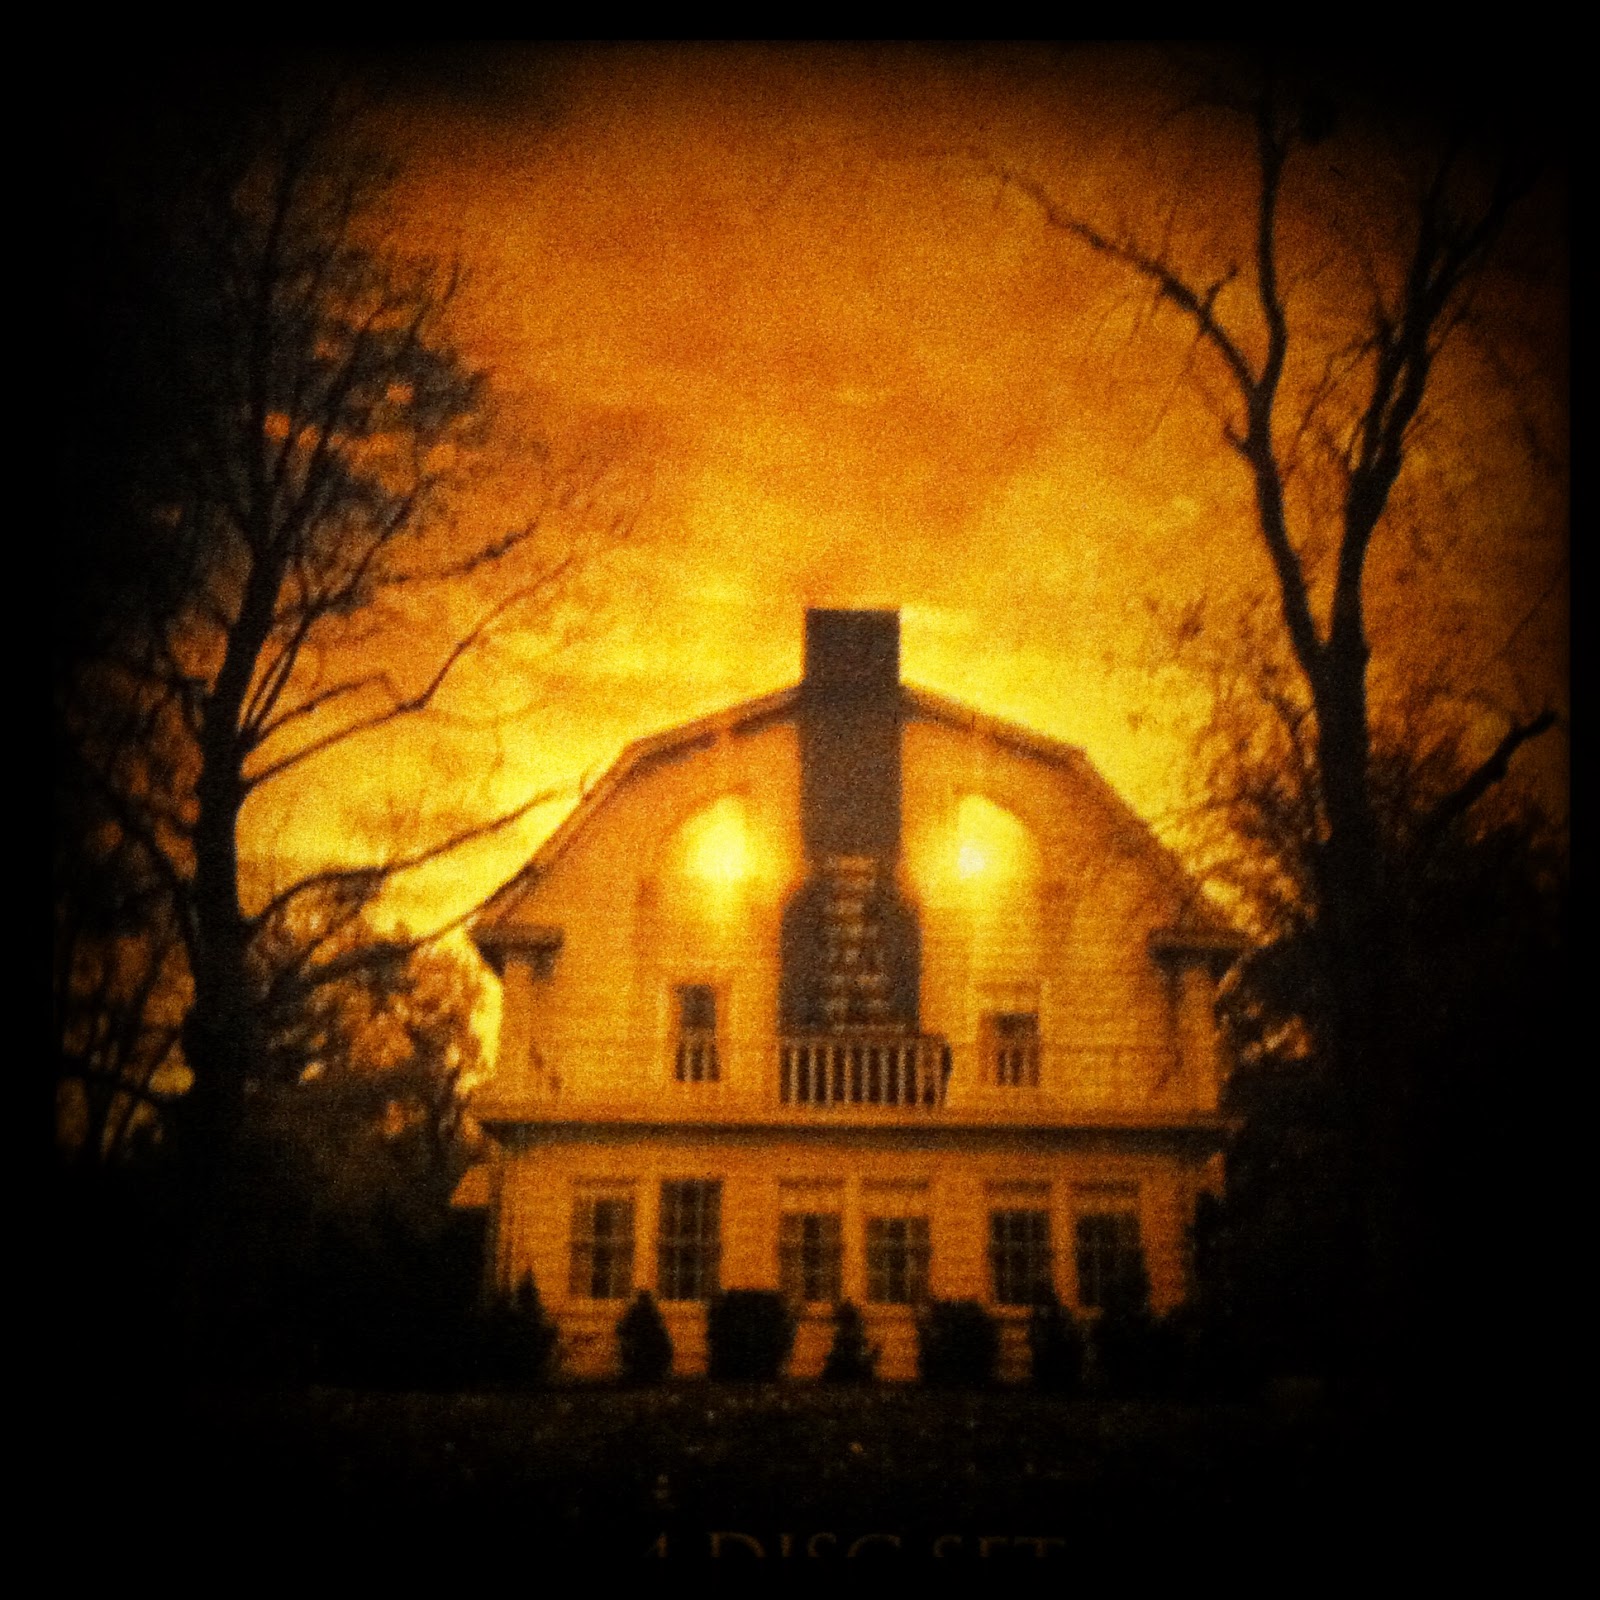 Somerset Productions Day 24 The Amityville Horror (1979)